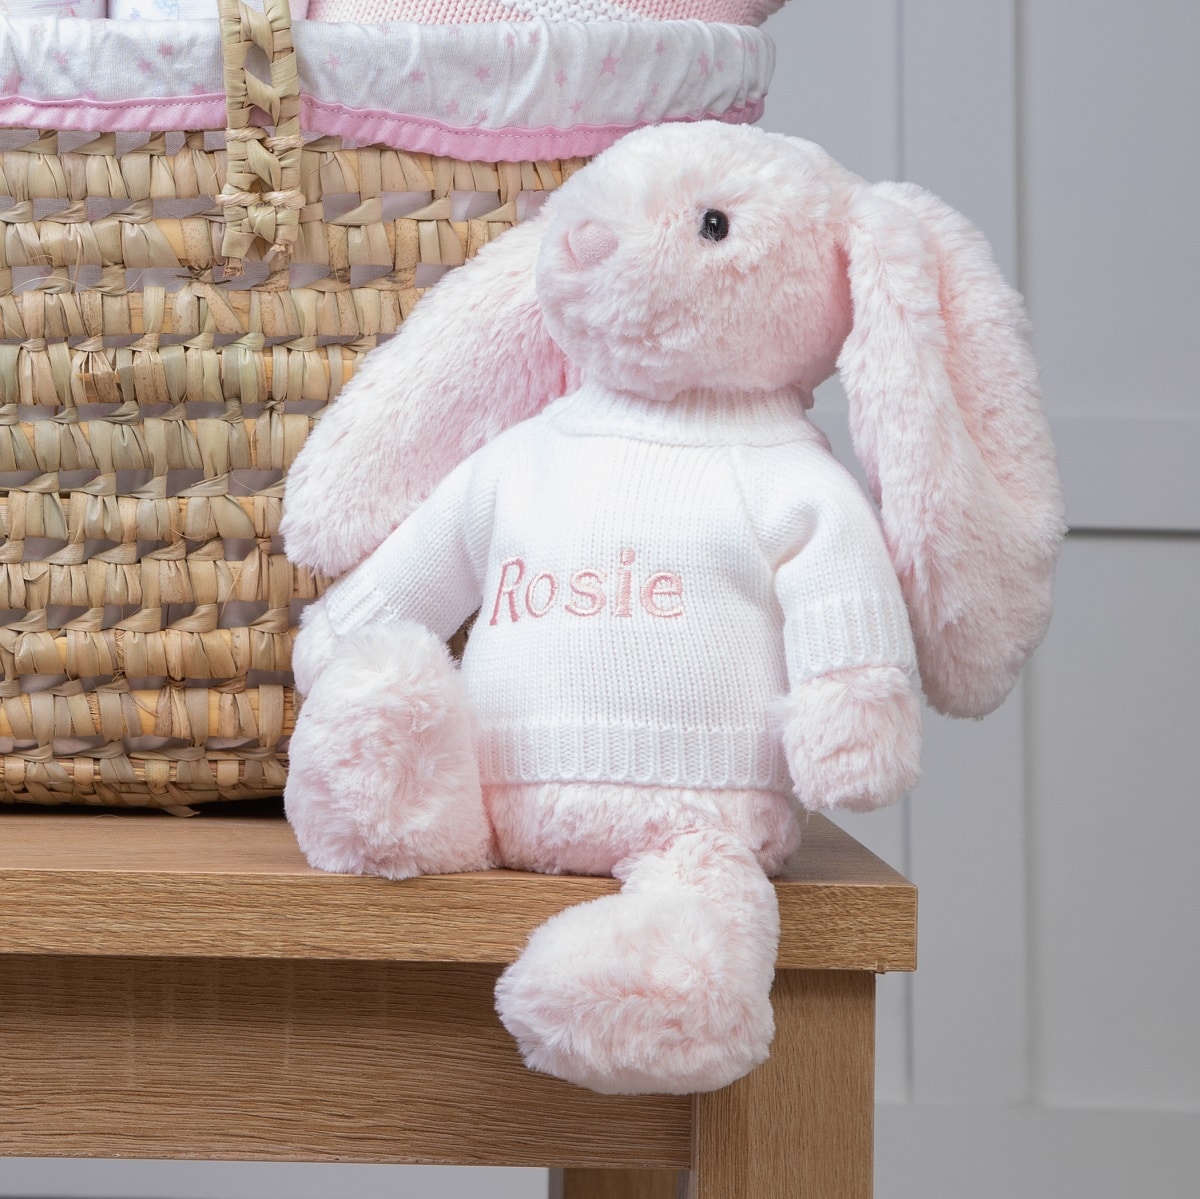 Personalised white and pink baby gift basket with pink bunny soft toy